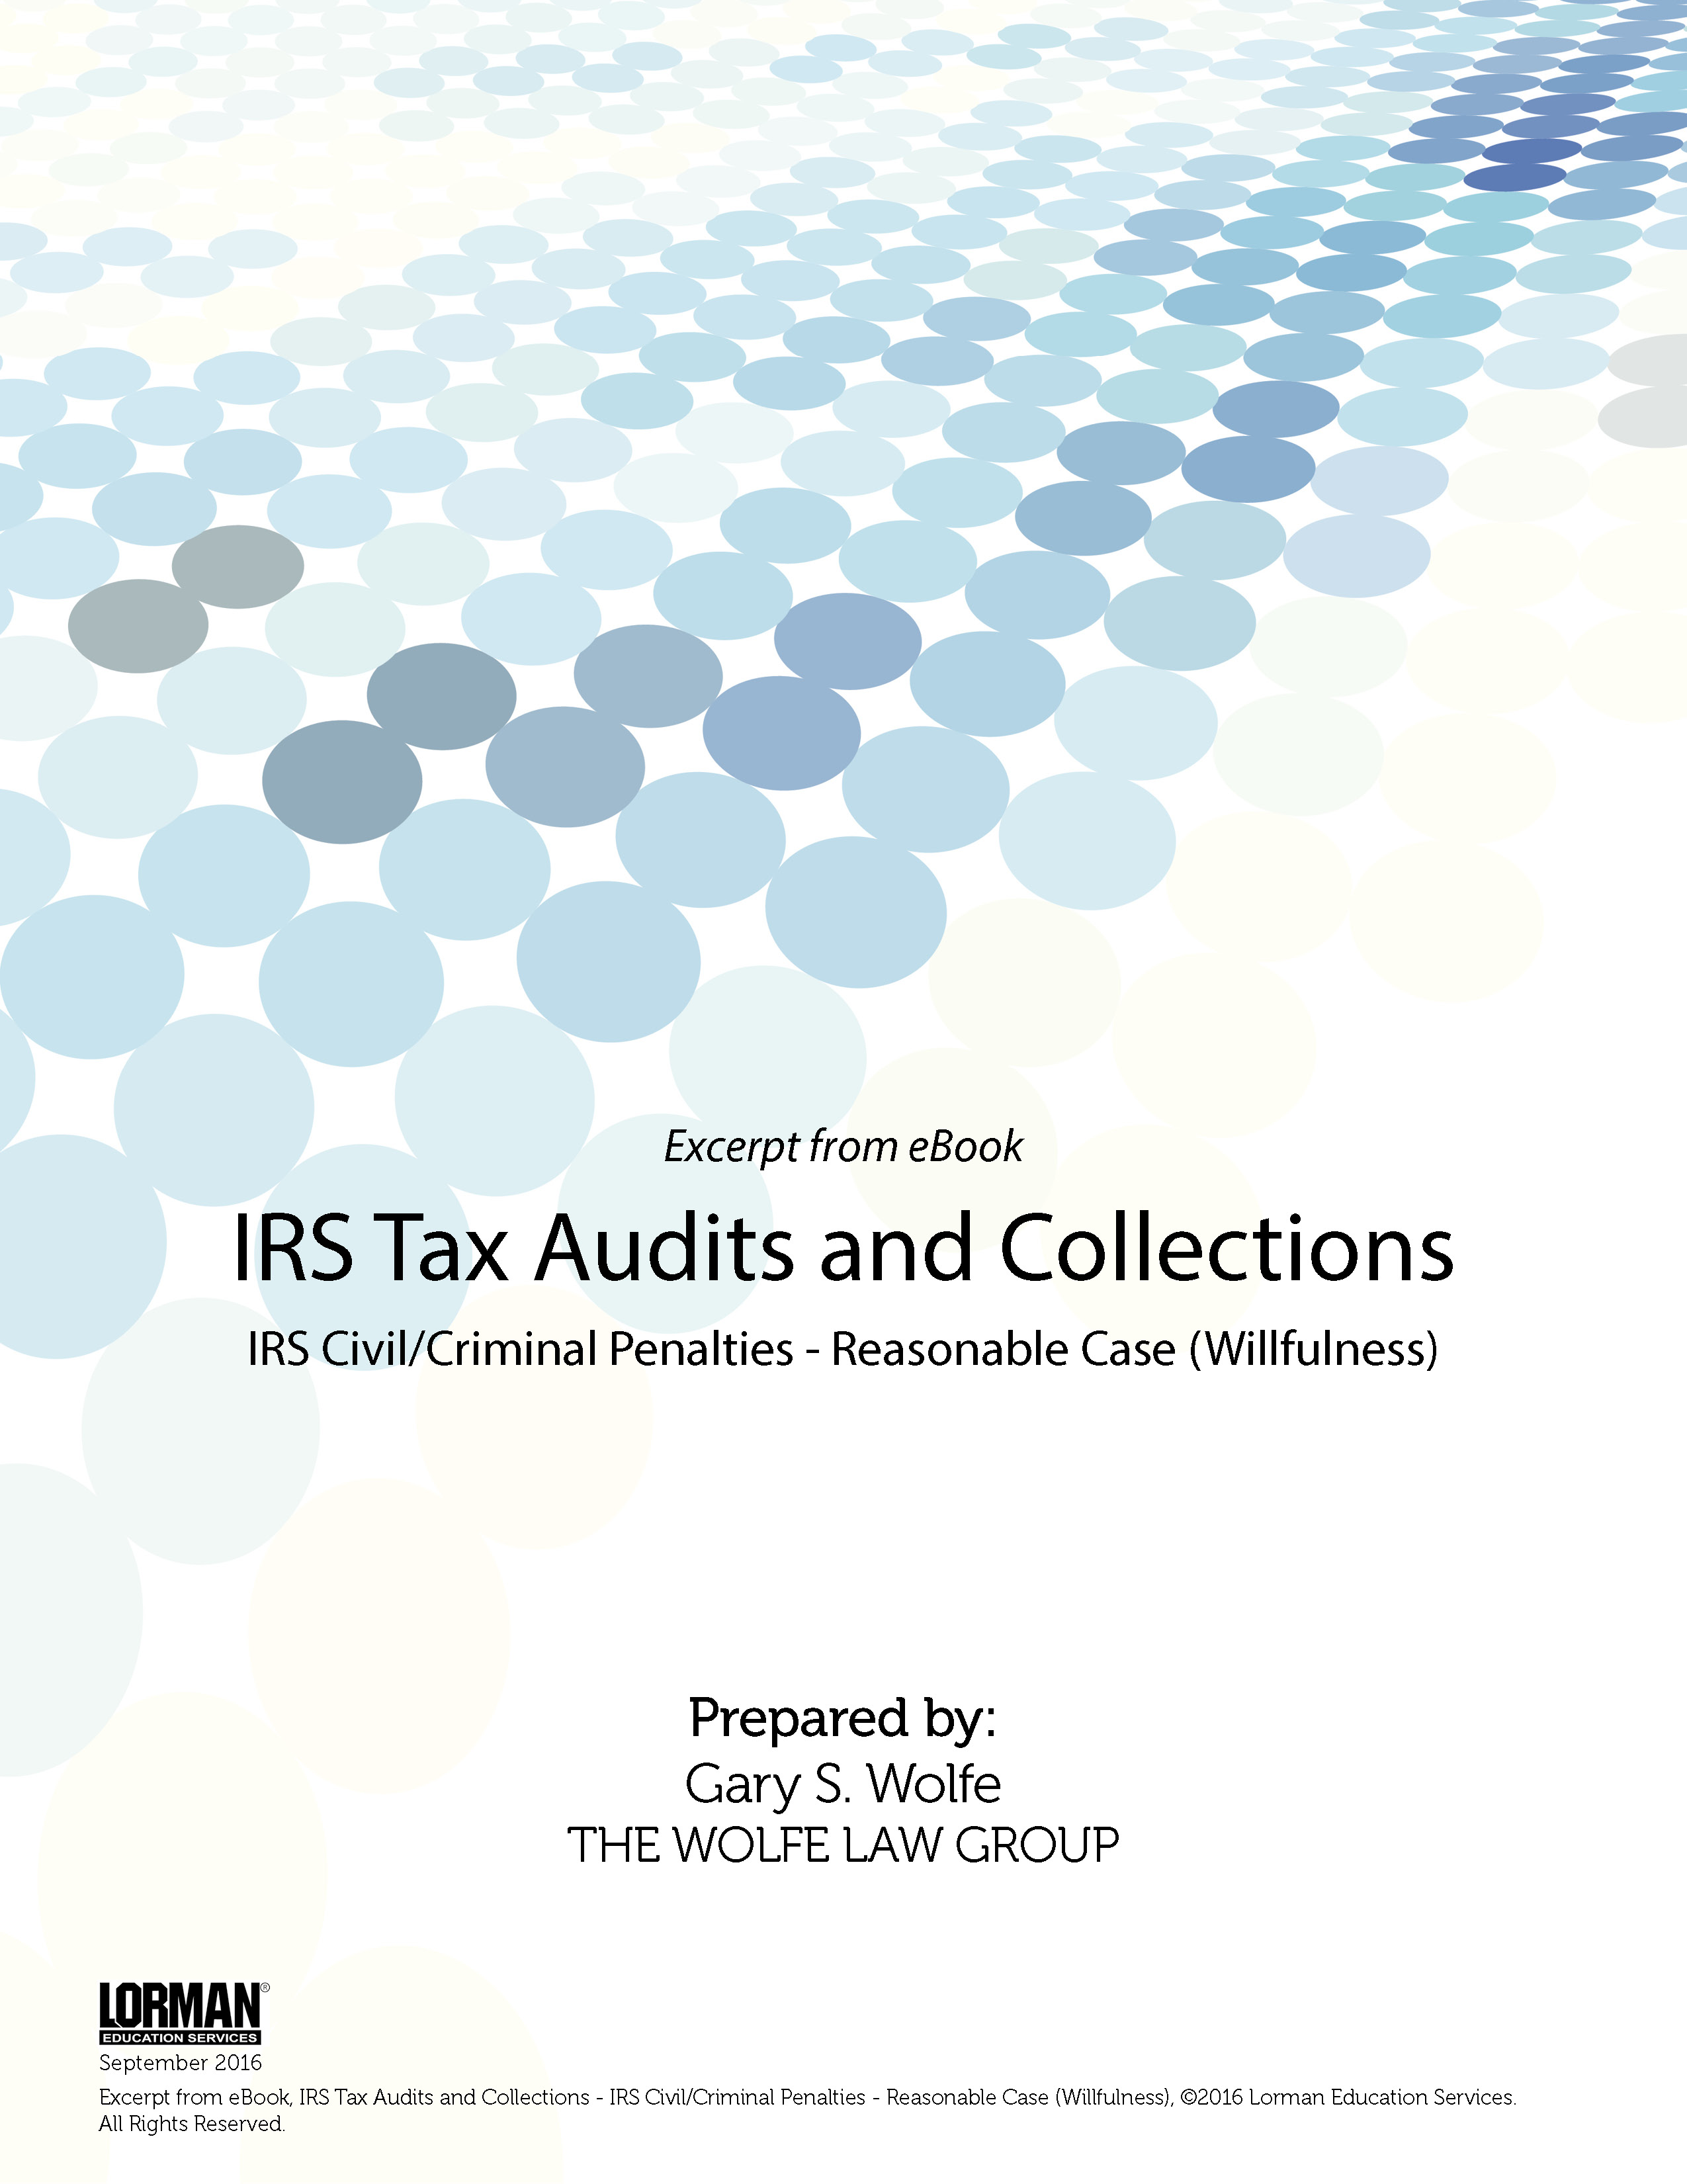 IRS Tax Audits and Collections: IRS Civil/Criminal Penalties - Reasonable Case (Willfulness)